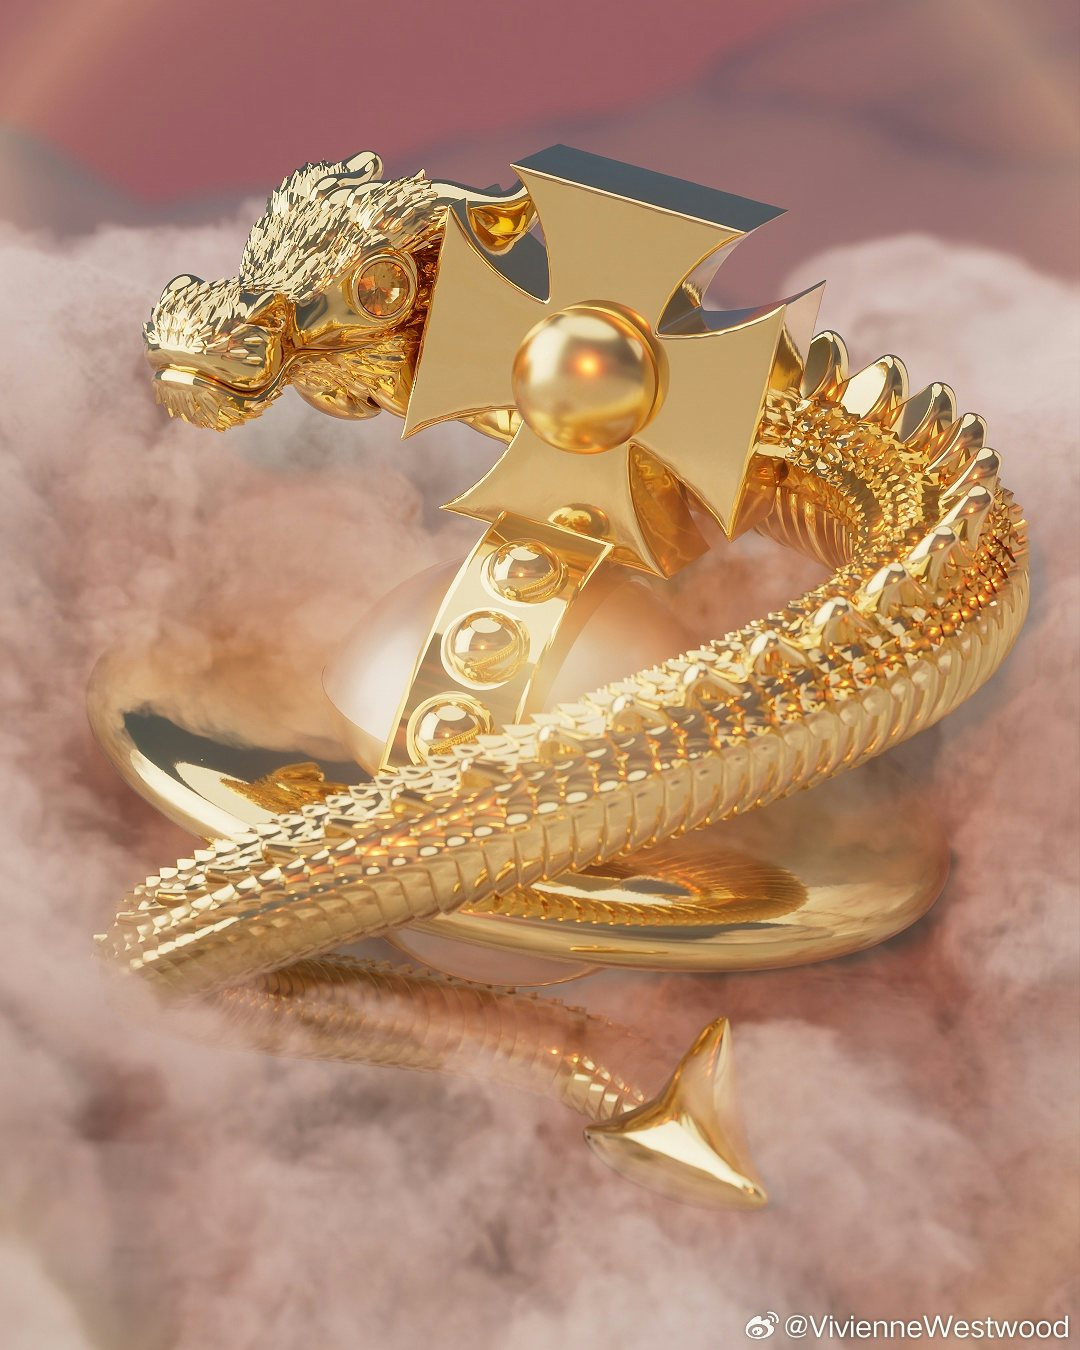 A dragon head in precious metal adorns Vivienne Westwood’s necklaces in the “Prosperity and Power” collection. Image: Vivienne Westwood